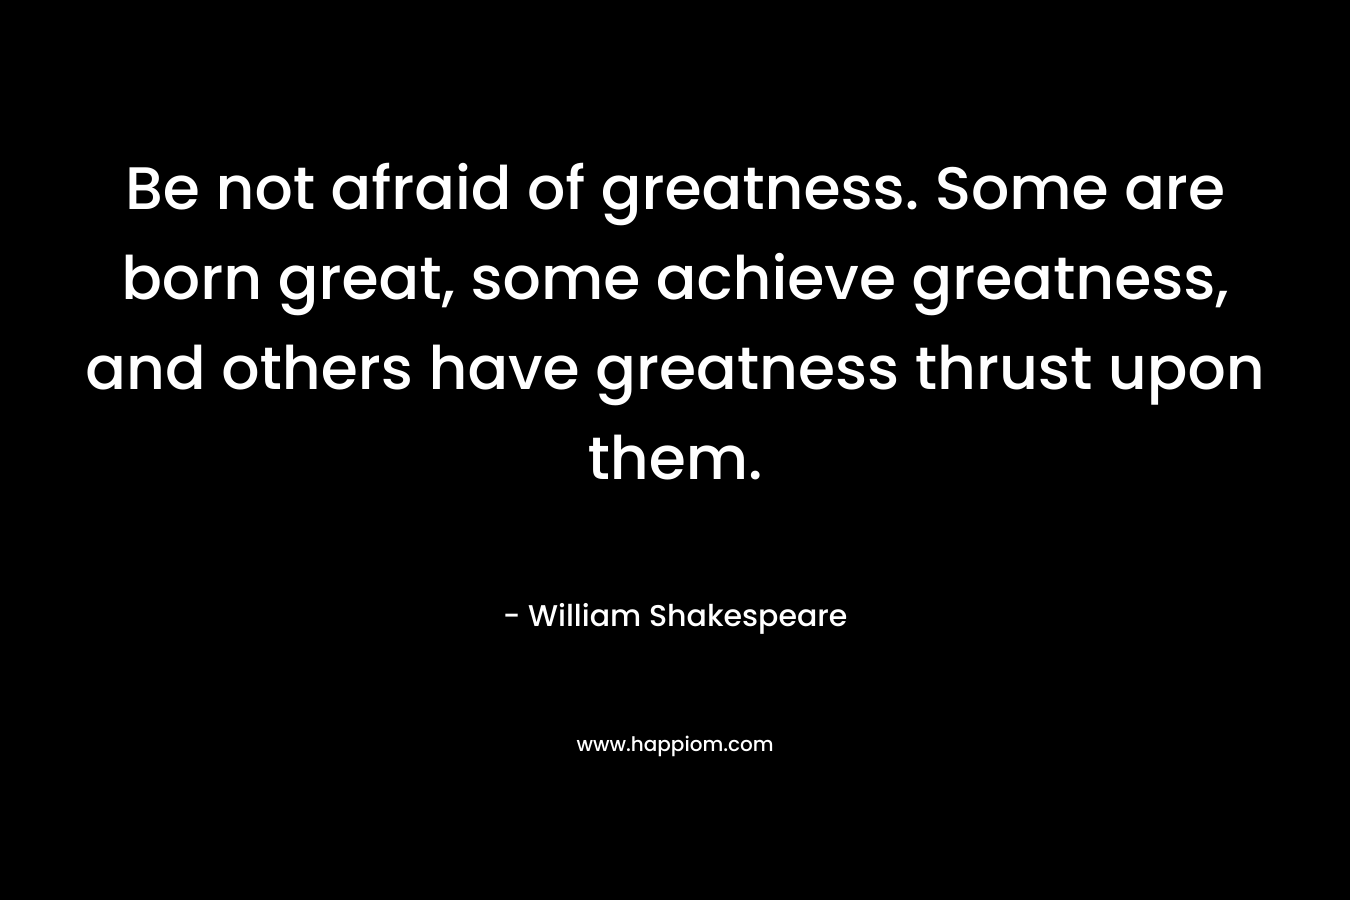 Be not afraid of greatness. Some are born great, some achieve greatness, and others have greatness thrust upon them. – William Shakespeare